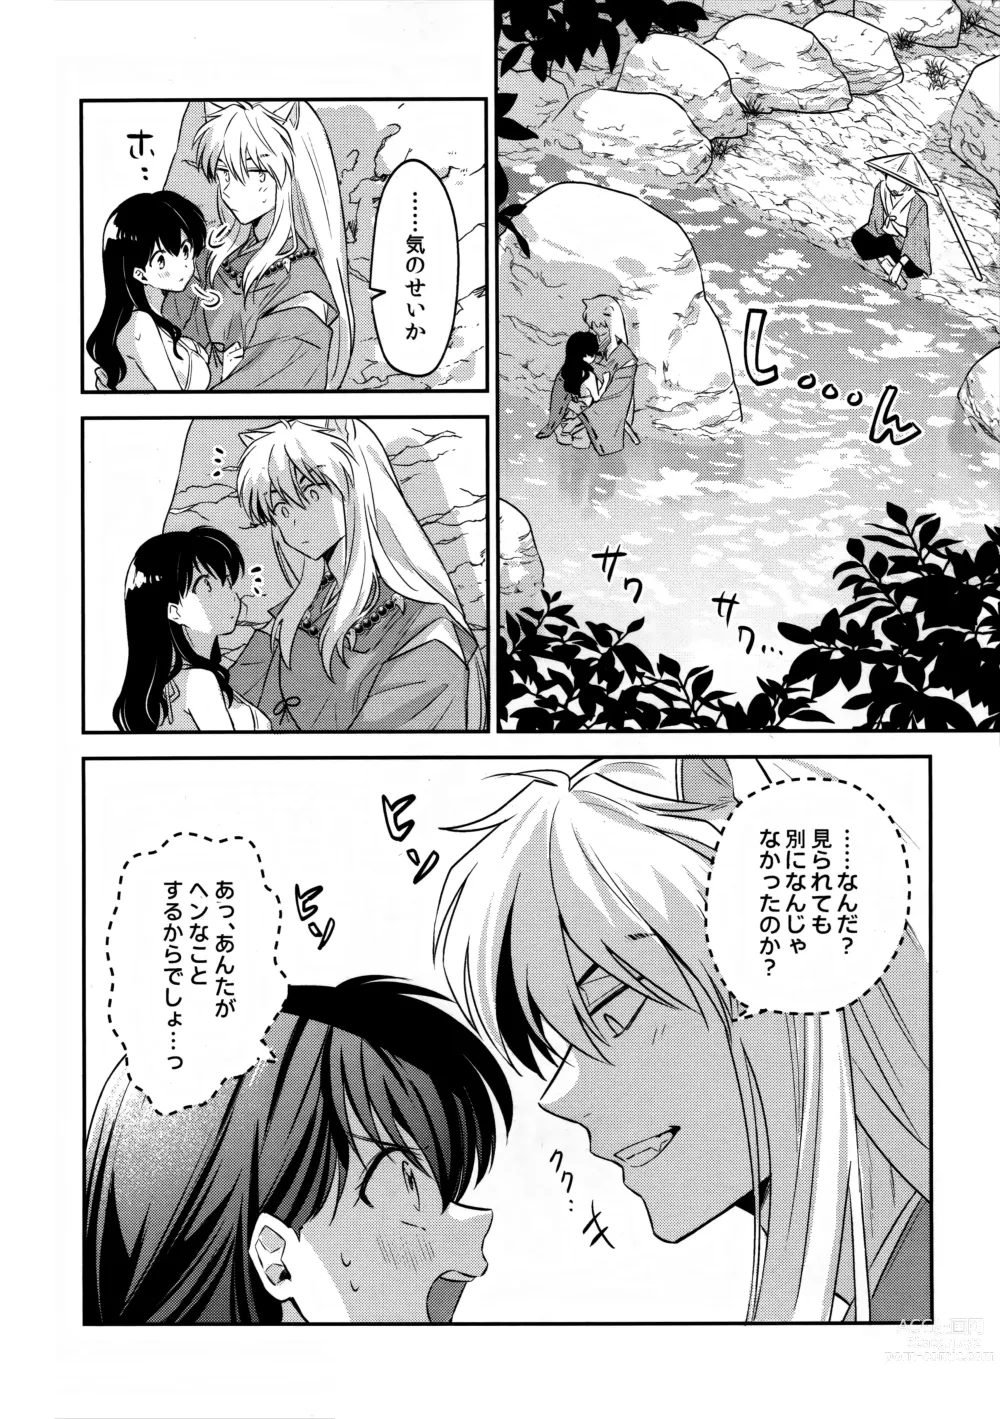 Page 11 of doujinshi LATE-SUMMER GREETHINGS TO YOU!